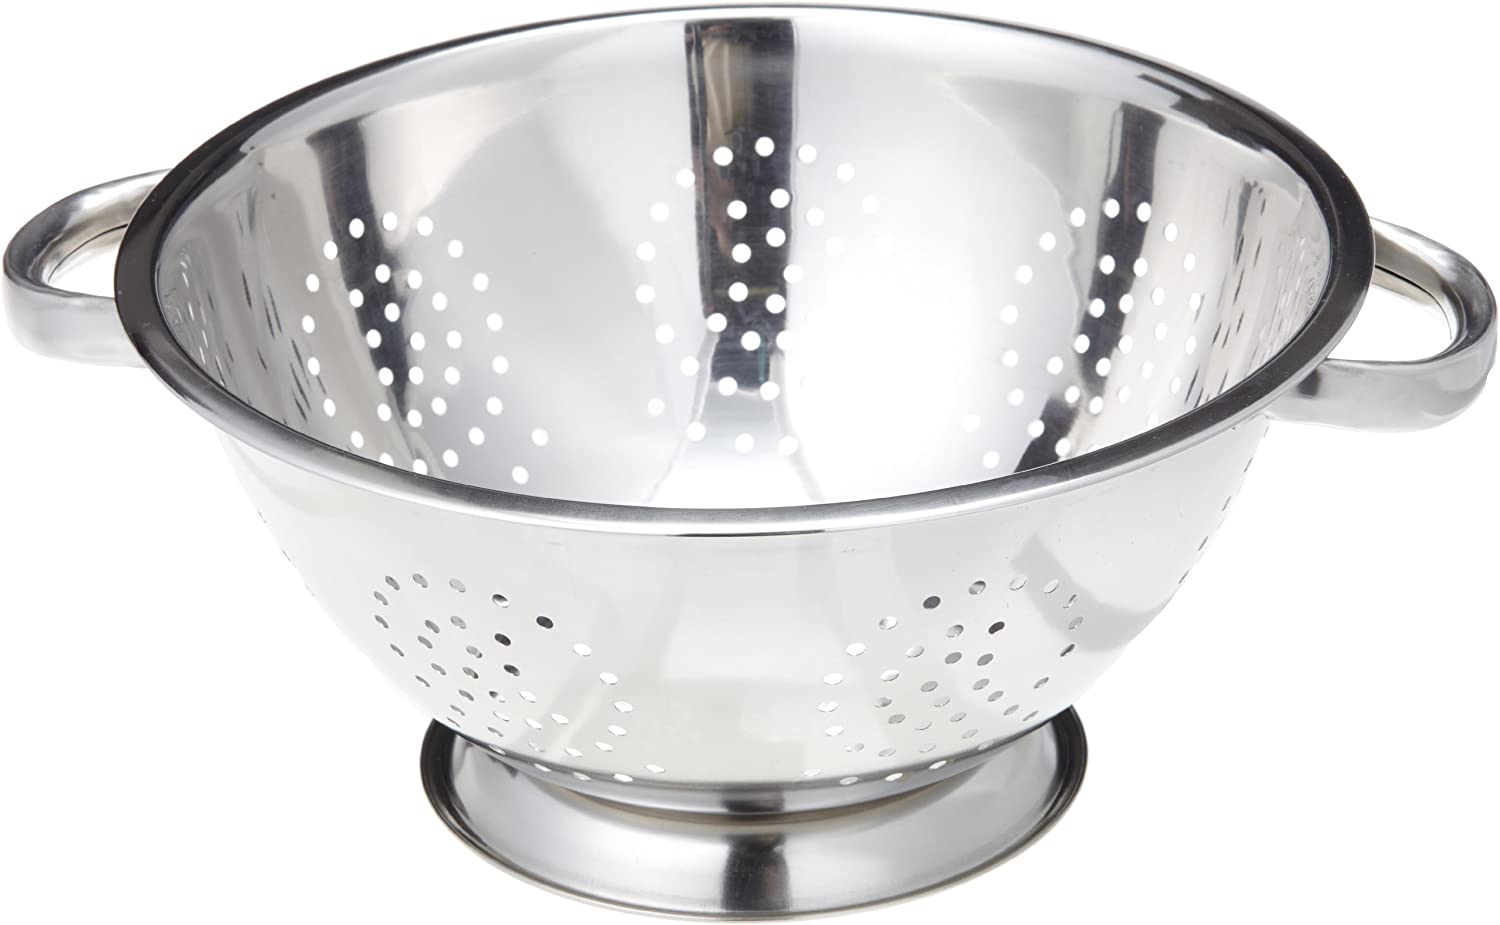 ExcelSteel Heavy Duty Handles and Self-draining Solid Ring Base Stainless Steel Colander, 5 Qt, Stainless